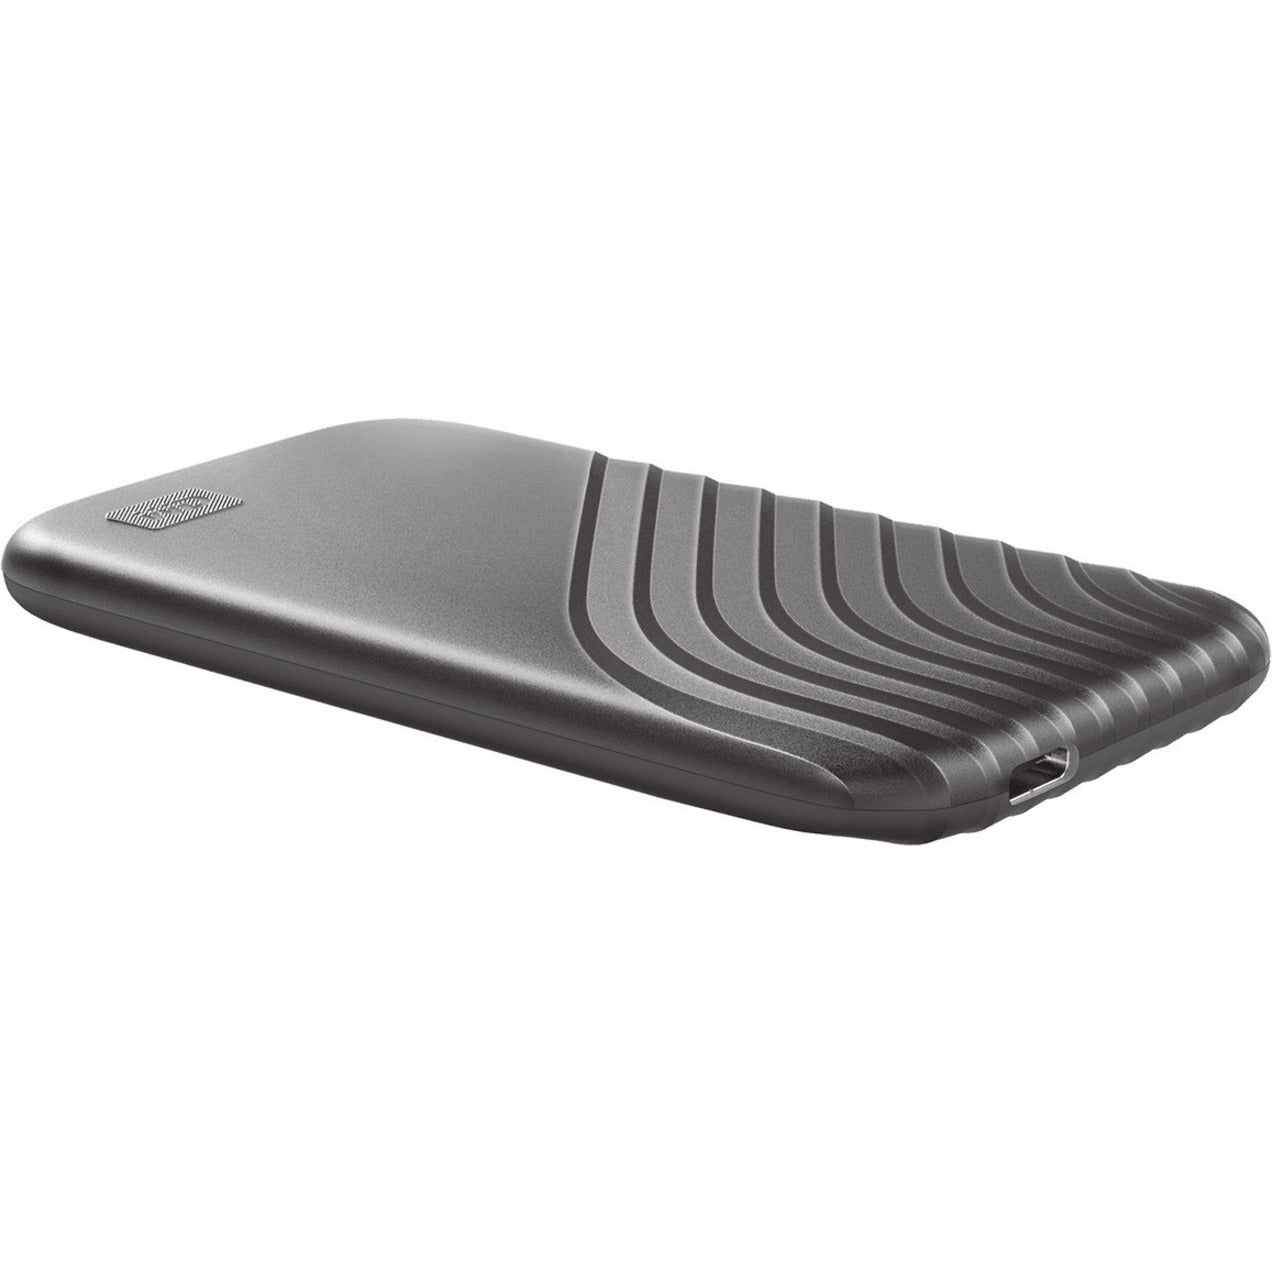 WD WDBAGF0020BGY-WESN My Passport Solid State Drive, 2TB, USB 3.2 Type C, Space Gray